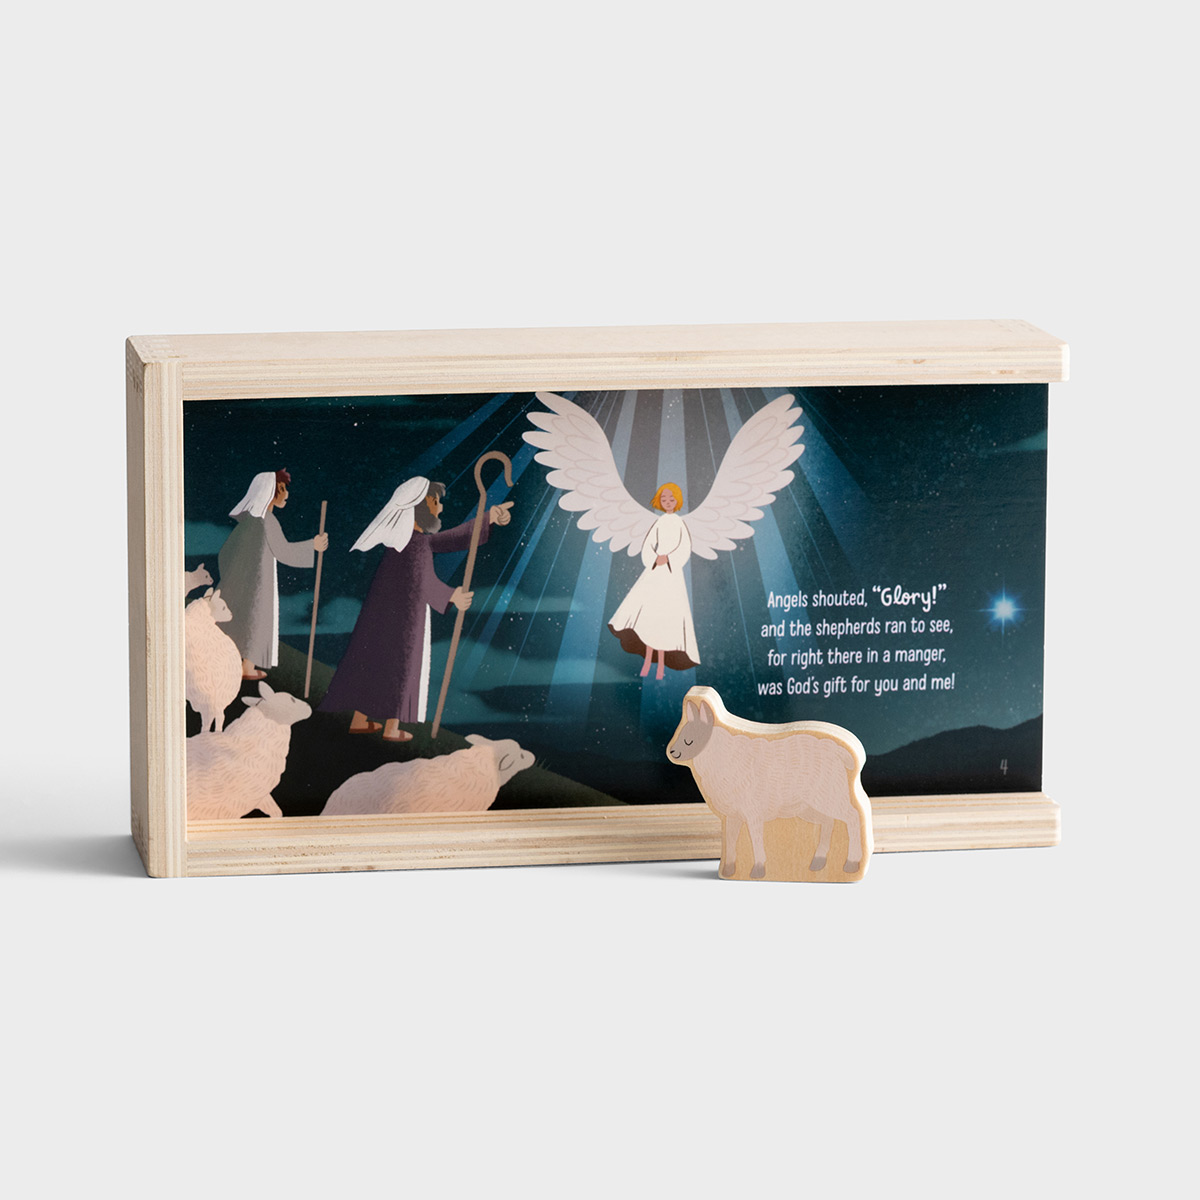 Jesus Is Born - BibleBox Nativity and Advent Ornament Book Gift Set